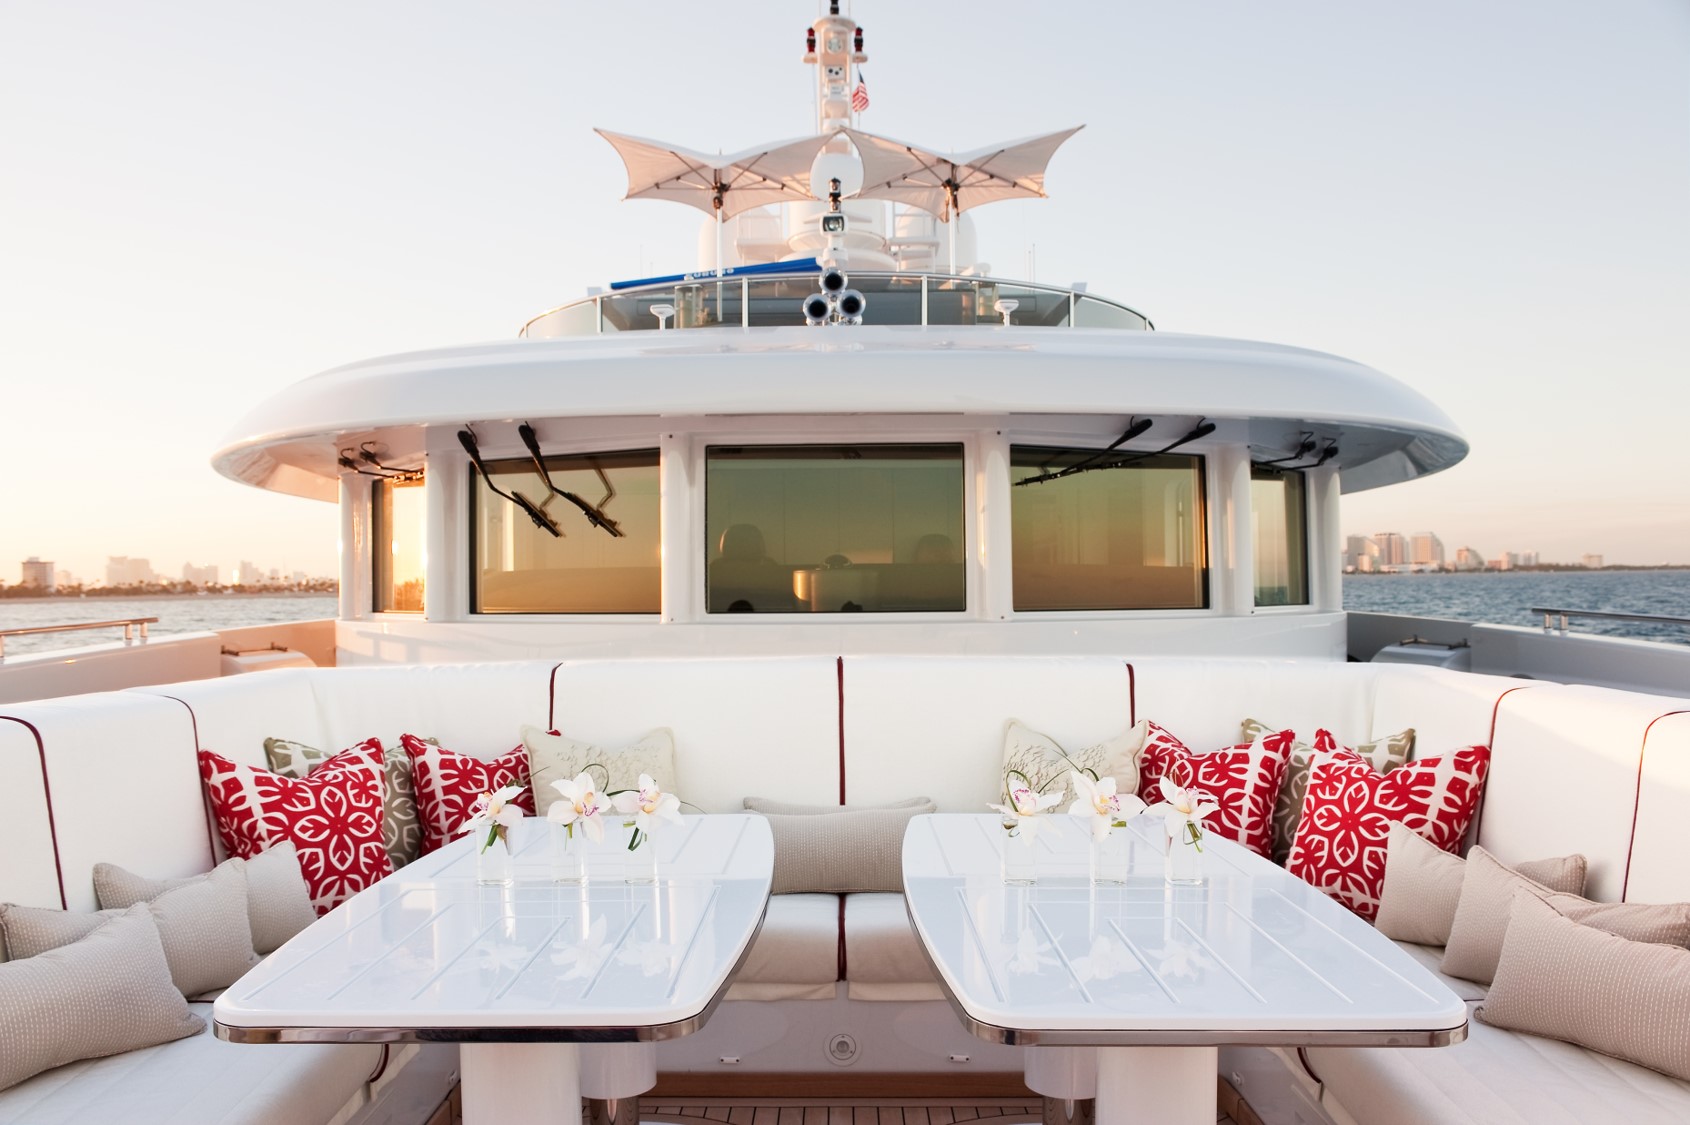 Designing the interiors of a multi-million pound yacht for the super-elite